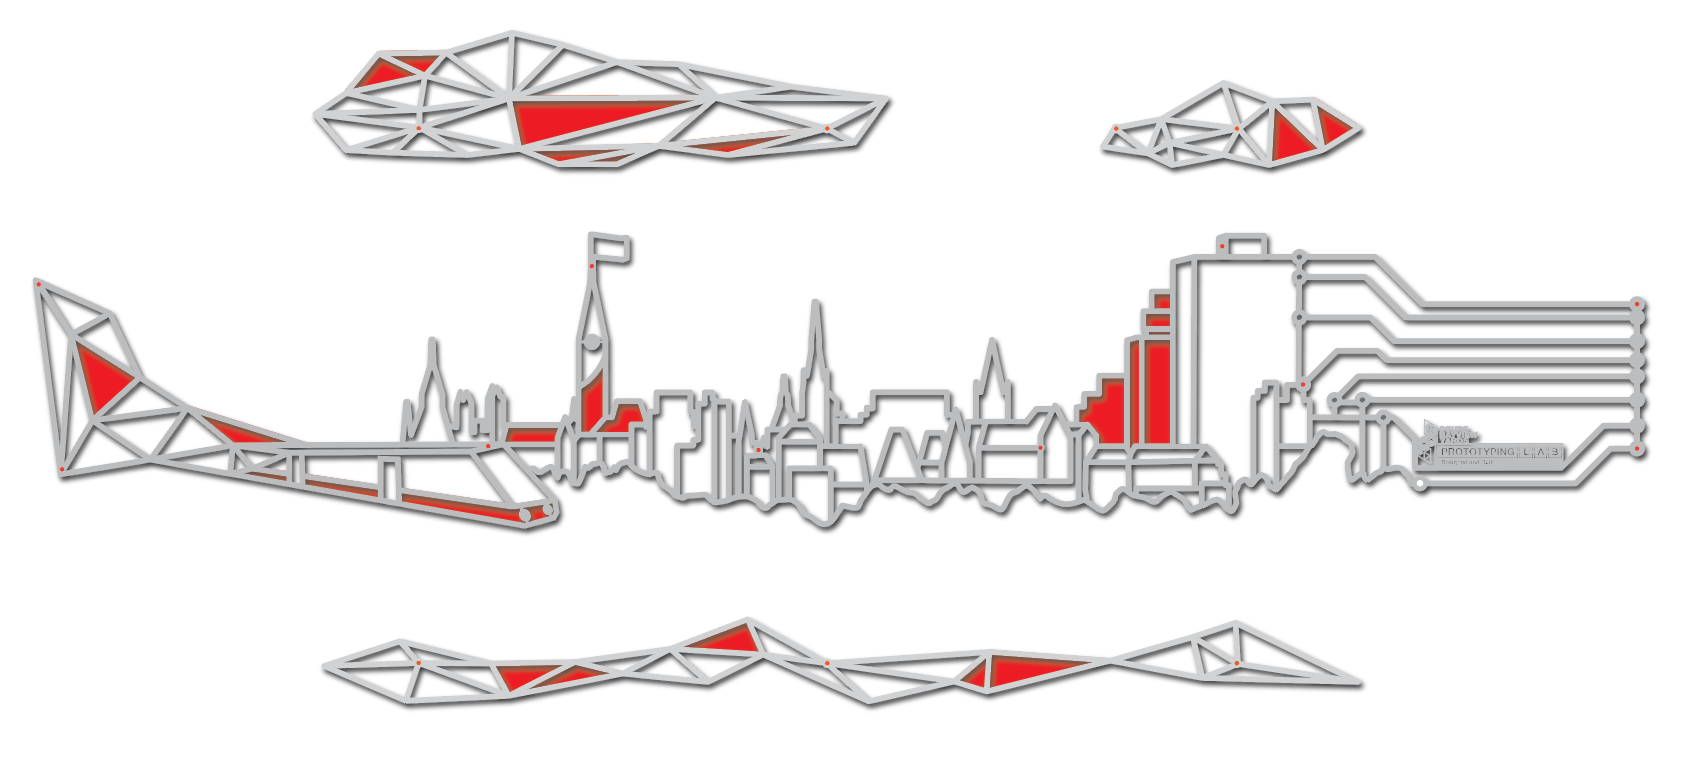 A digital version of the Bayview Yards' Prototyping Lab's artwork, "Connected City."